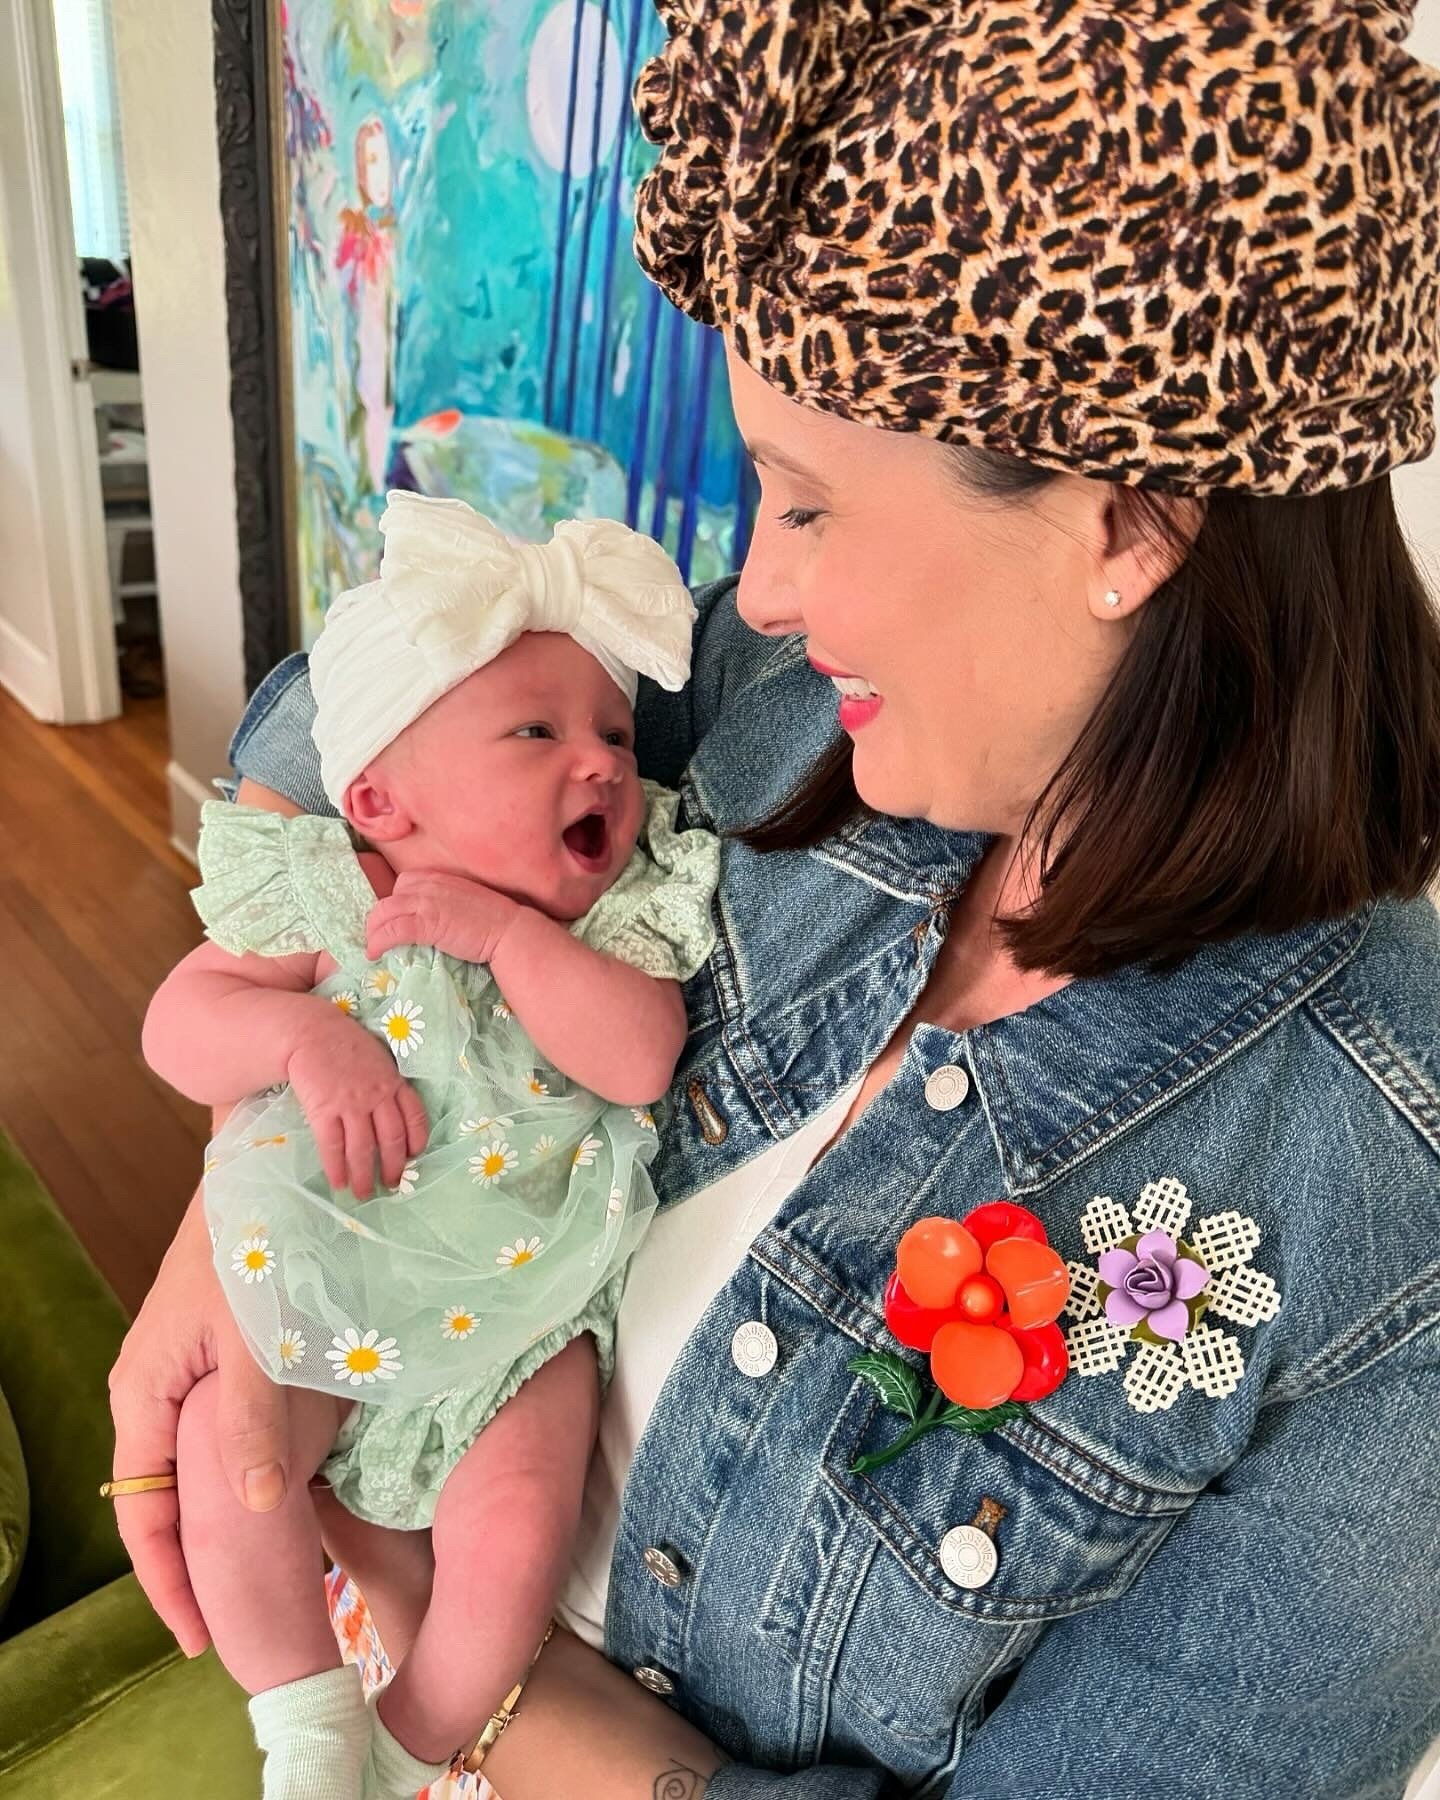 🌼💕 Feeling so many feelings today! 
Happy Mother&rsquo;s Day everyone. 

Dear Matilda, thank you for changing mommy&rsquo;s life in the biggest way.

Dear Derrick, thank you for showering me with so much love &amp; appreciation on my first Mother&r